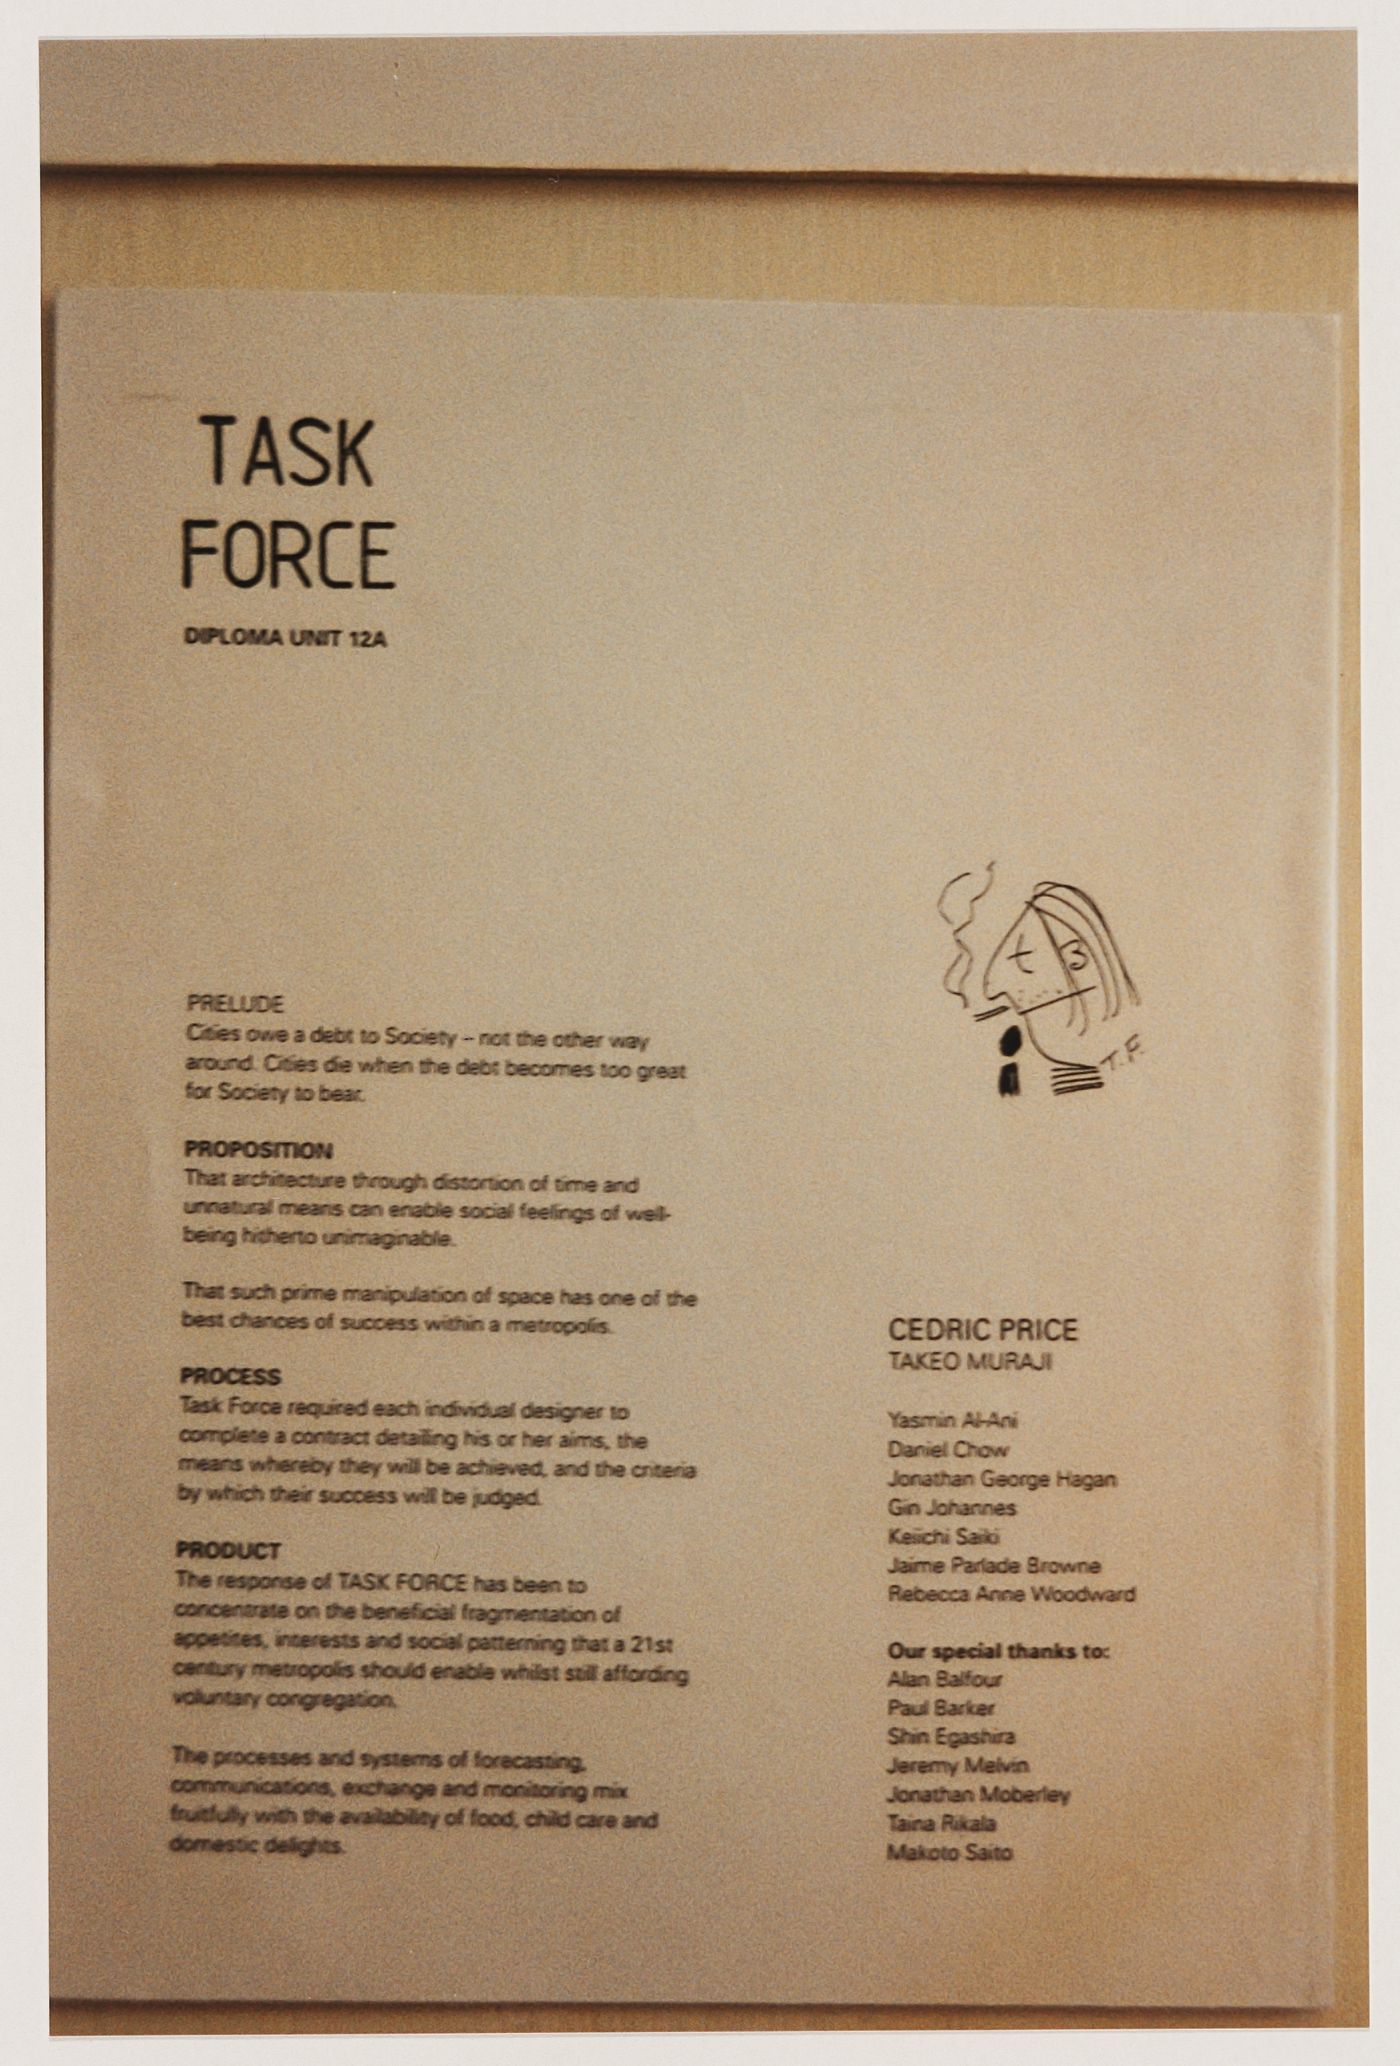 Text from a presentation of the "Task Force" diploma unit at "Projects Review 94-95" at the Architectural Association, London, England